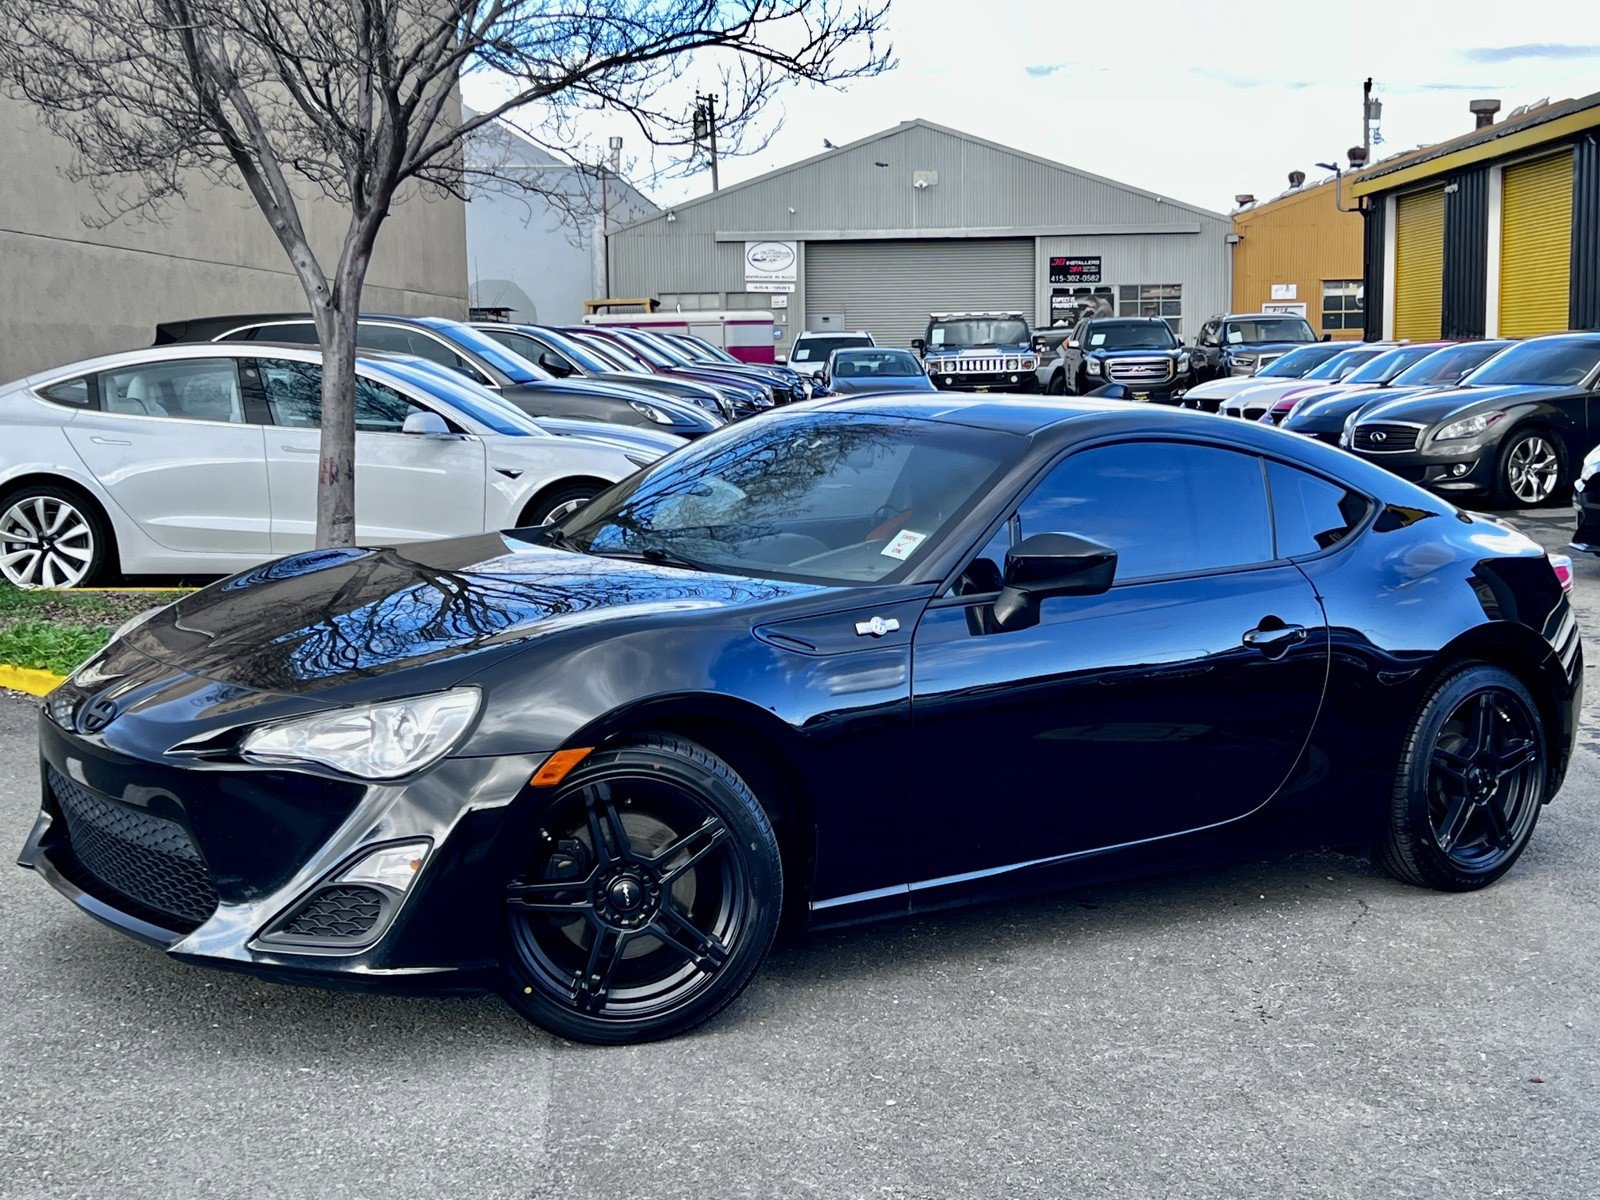 Used Scion FR-S for Sale Right Now - Autotrader